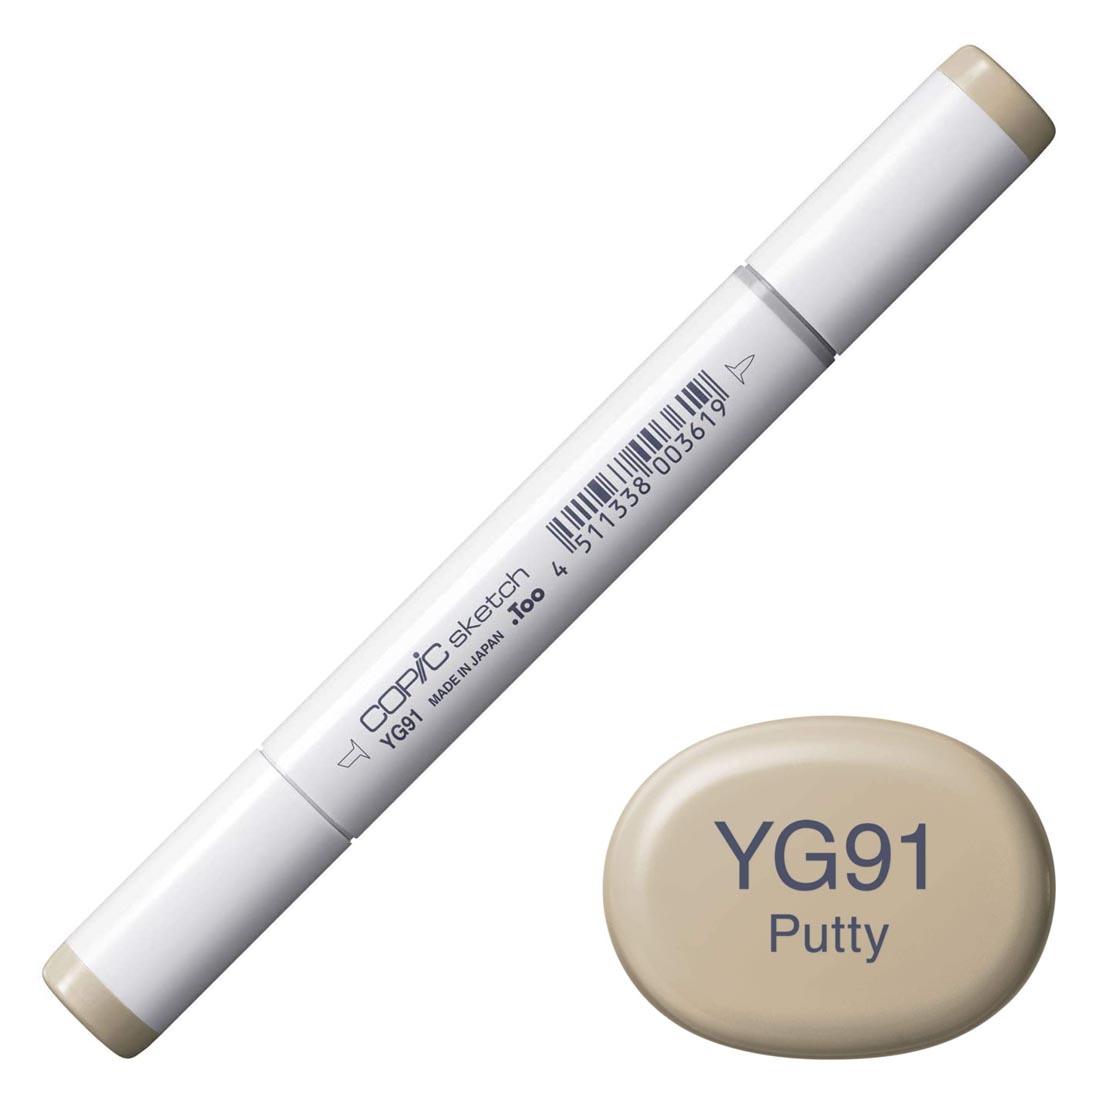 COPIC Sketch Marker with a color swatch and text of YG91 Putty